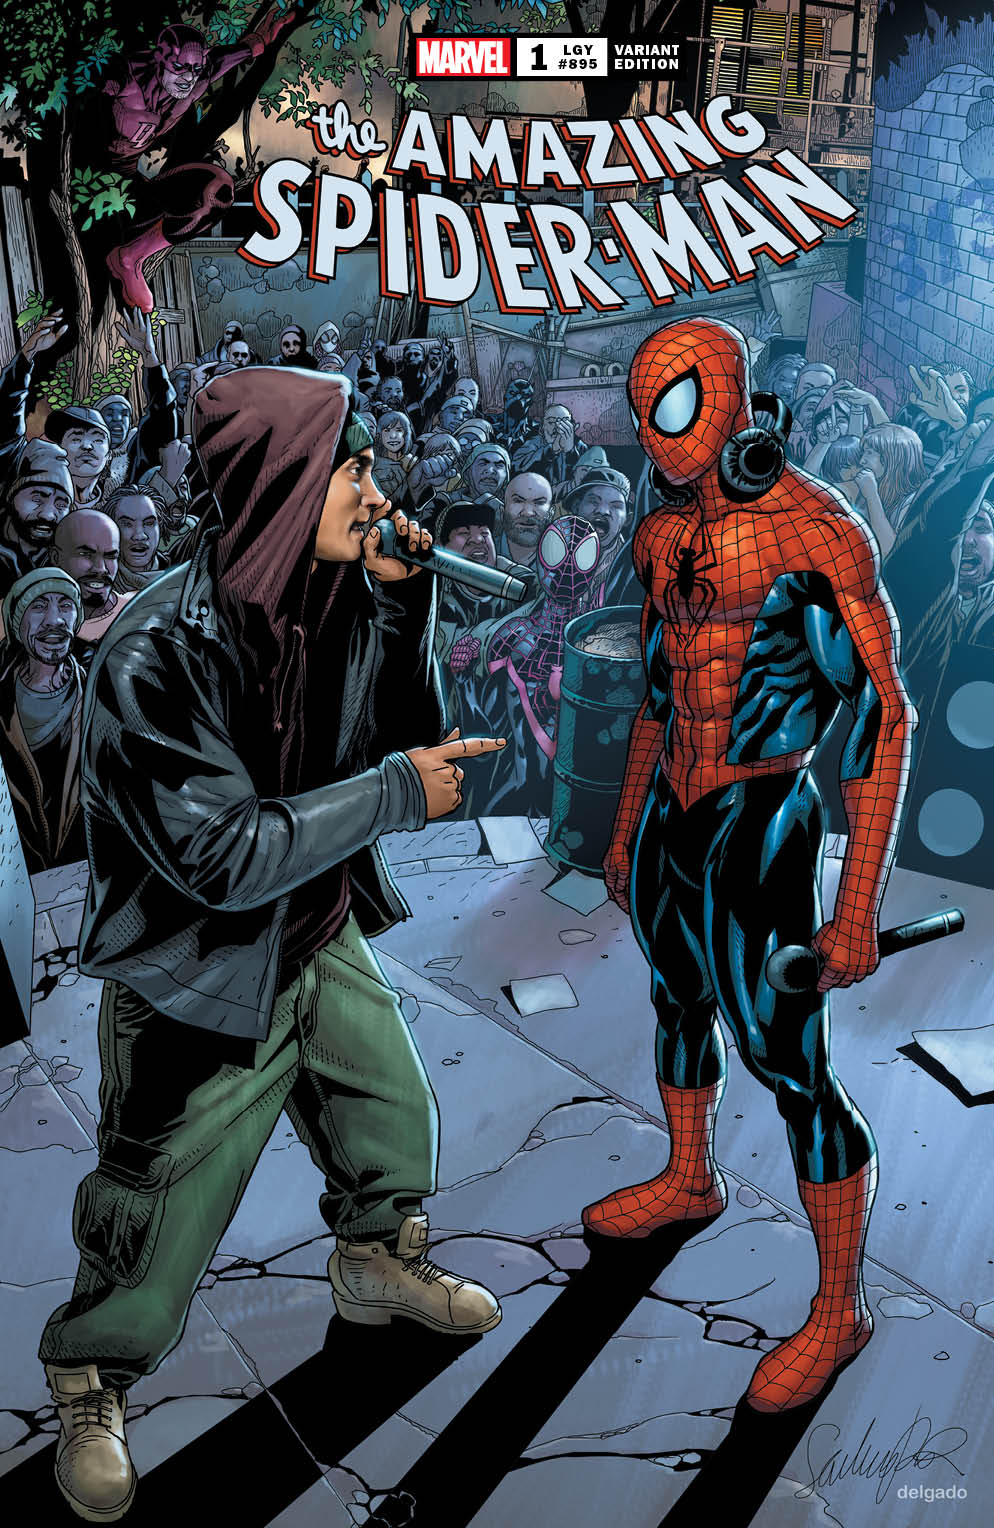 Eminem partners with Spider-Man and Marvel for another comic collaboration  | Popverse